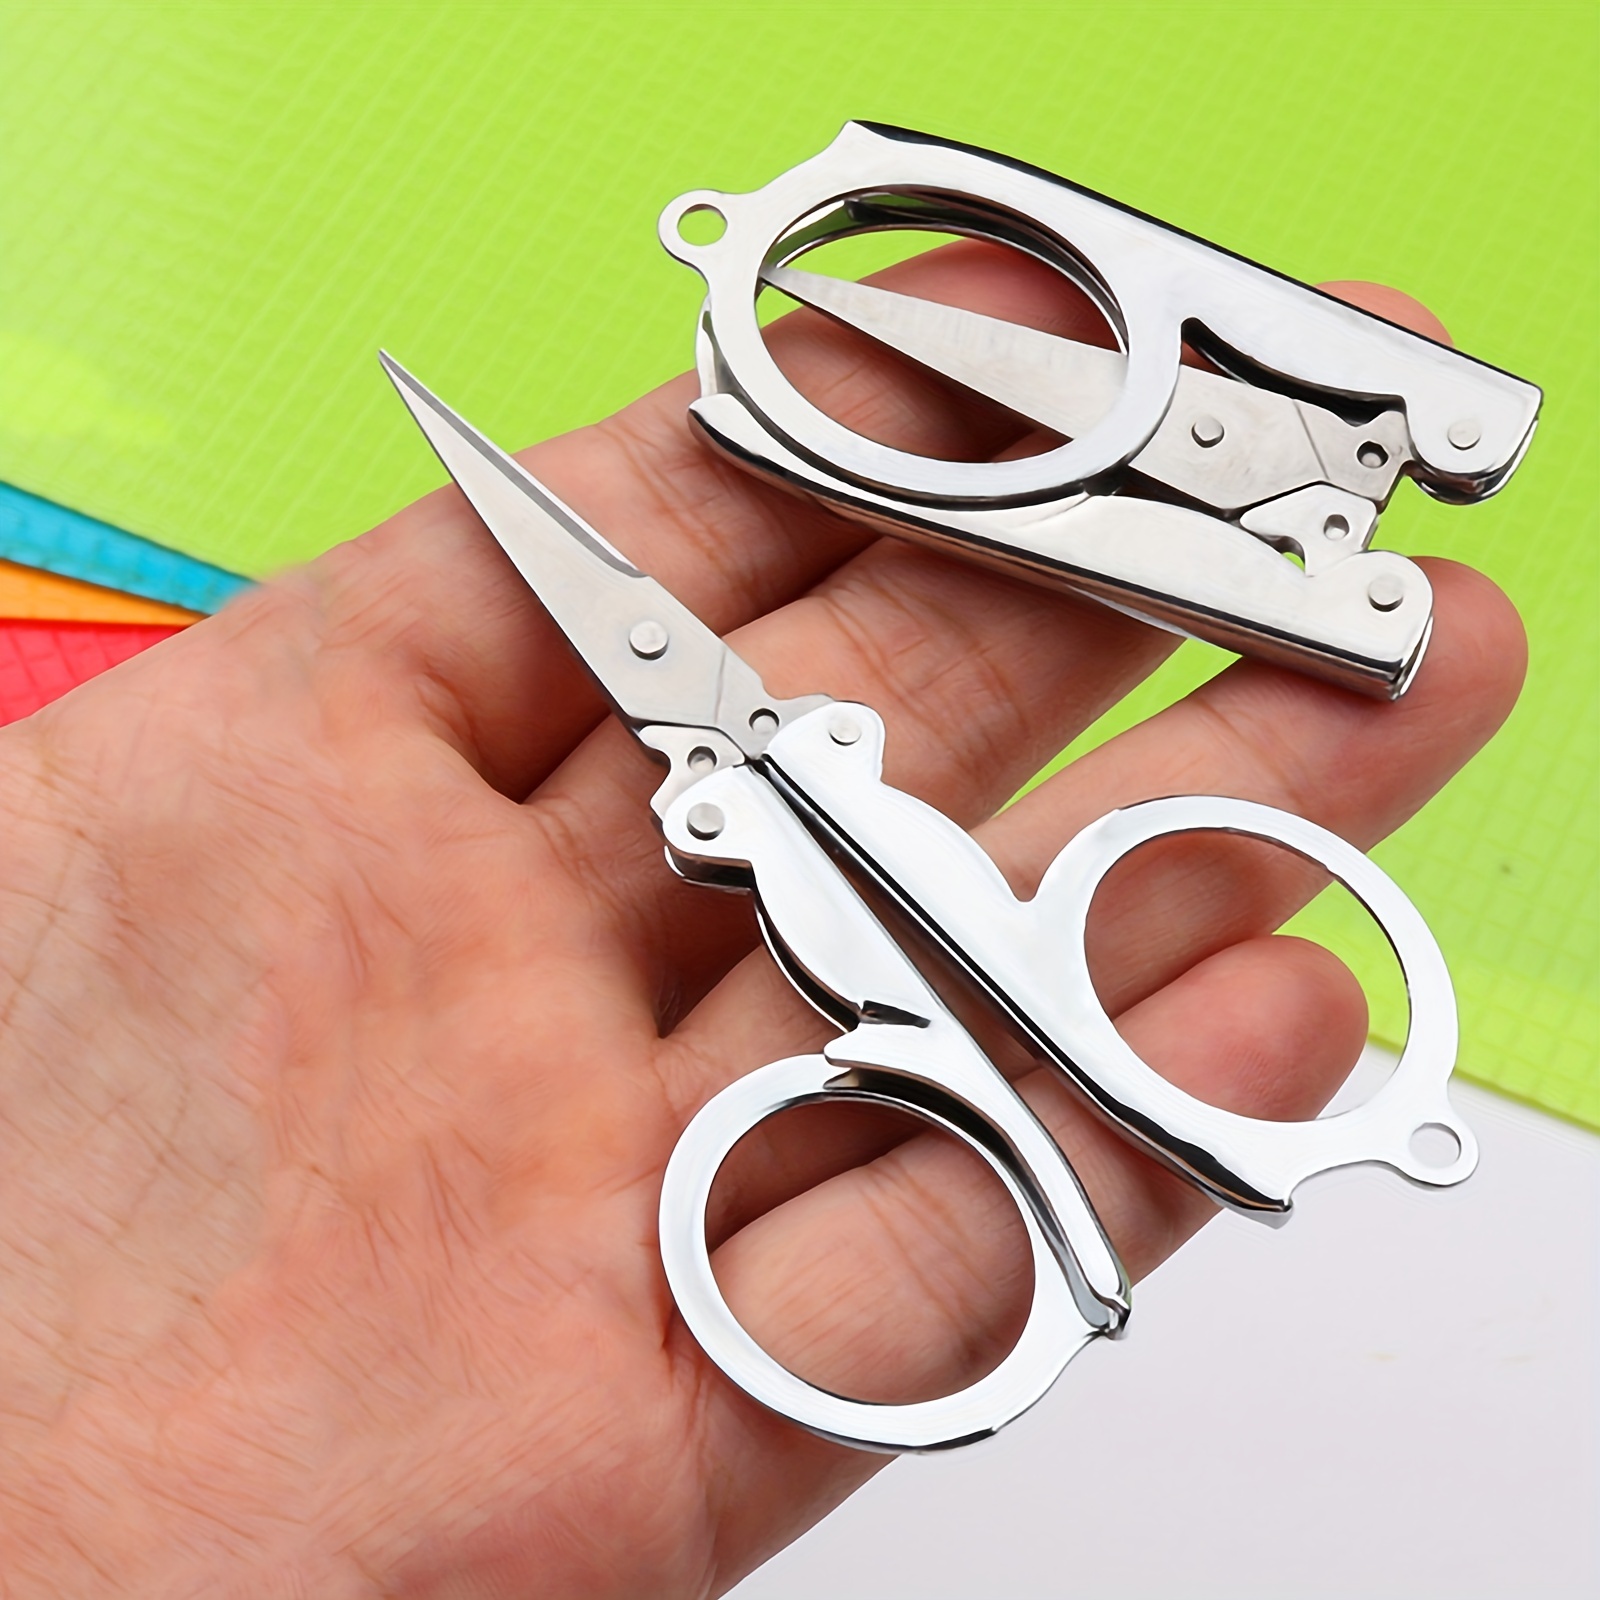  3 Pcs Folding Scissors,Portable Mini Travel Trip  Scissors,Safety Foldable Small Scissors,Crafting Scissors,Stainless Steel  Telescopic Cutter Used for Home Office,School, Camping : Arts, Crafts &  Sewing